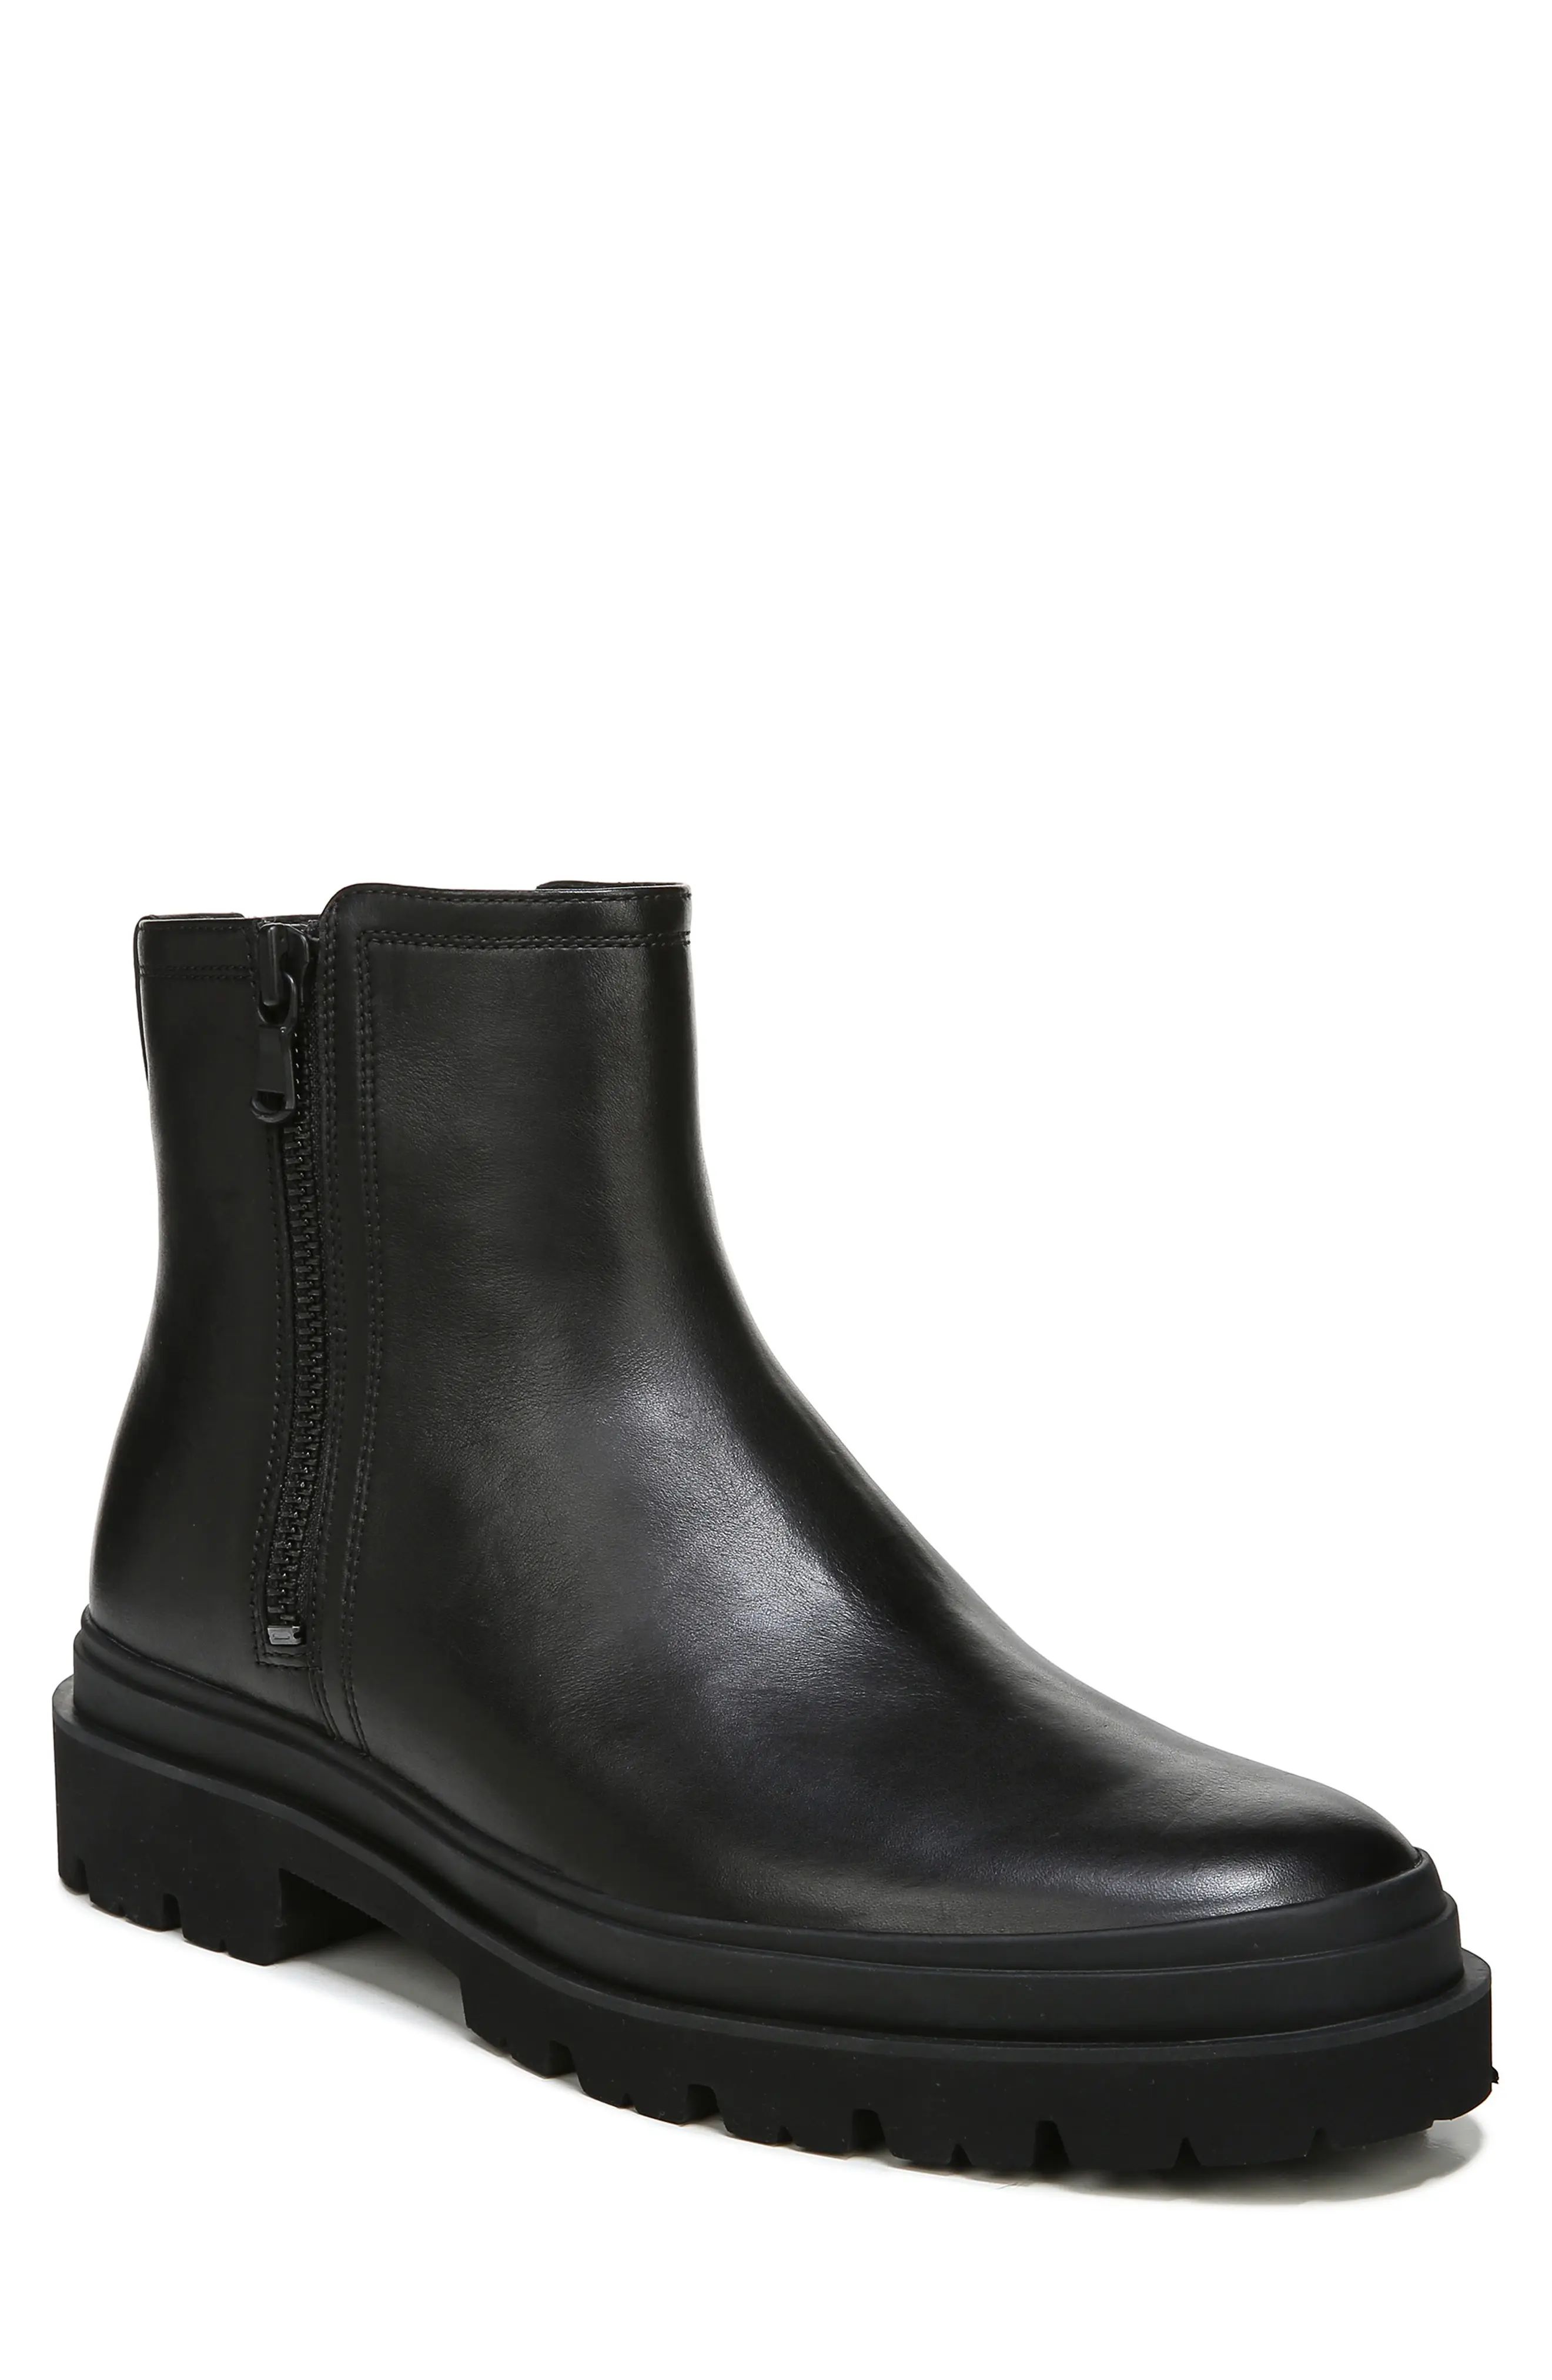 Vince Romero Leather Boot in Black Leather at Nordstrom, Size 10.5 | Nordstrom